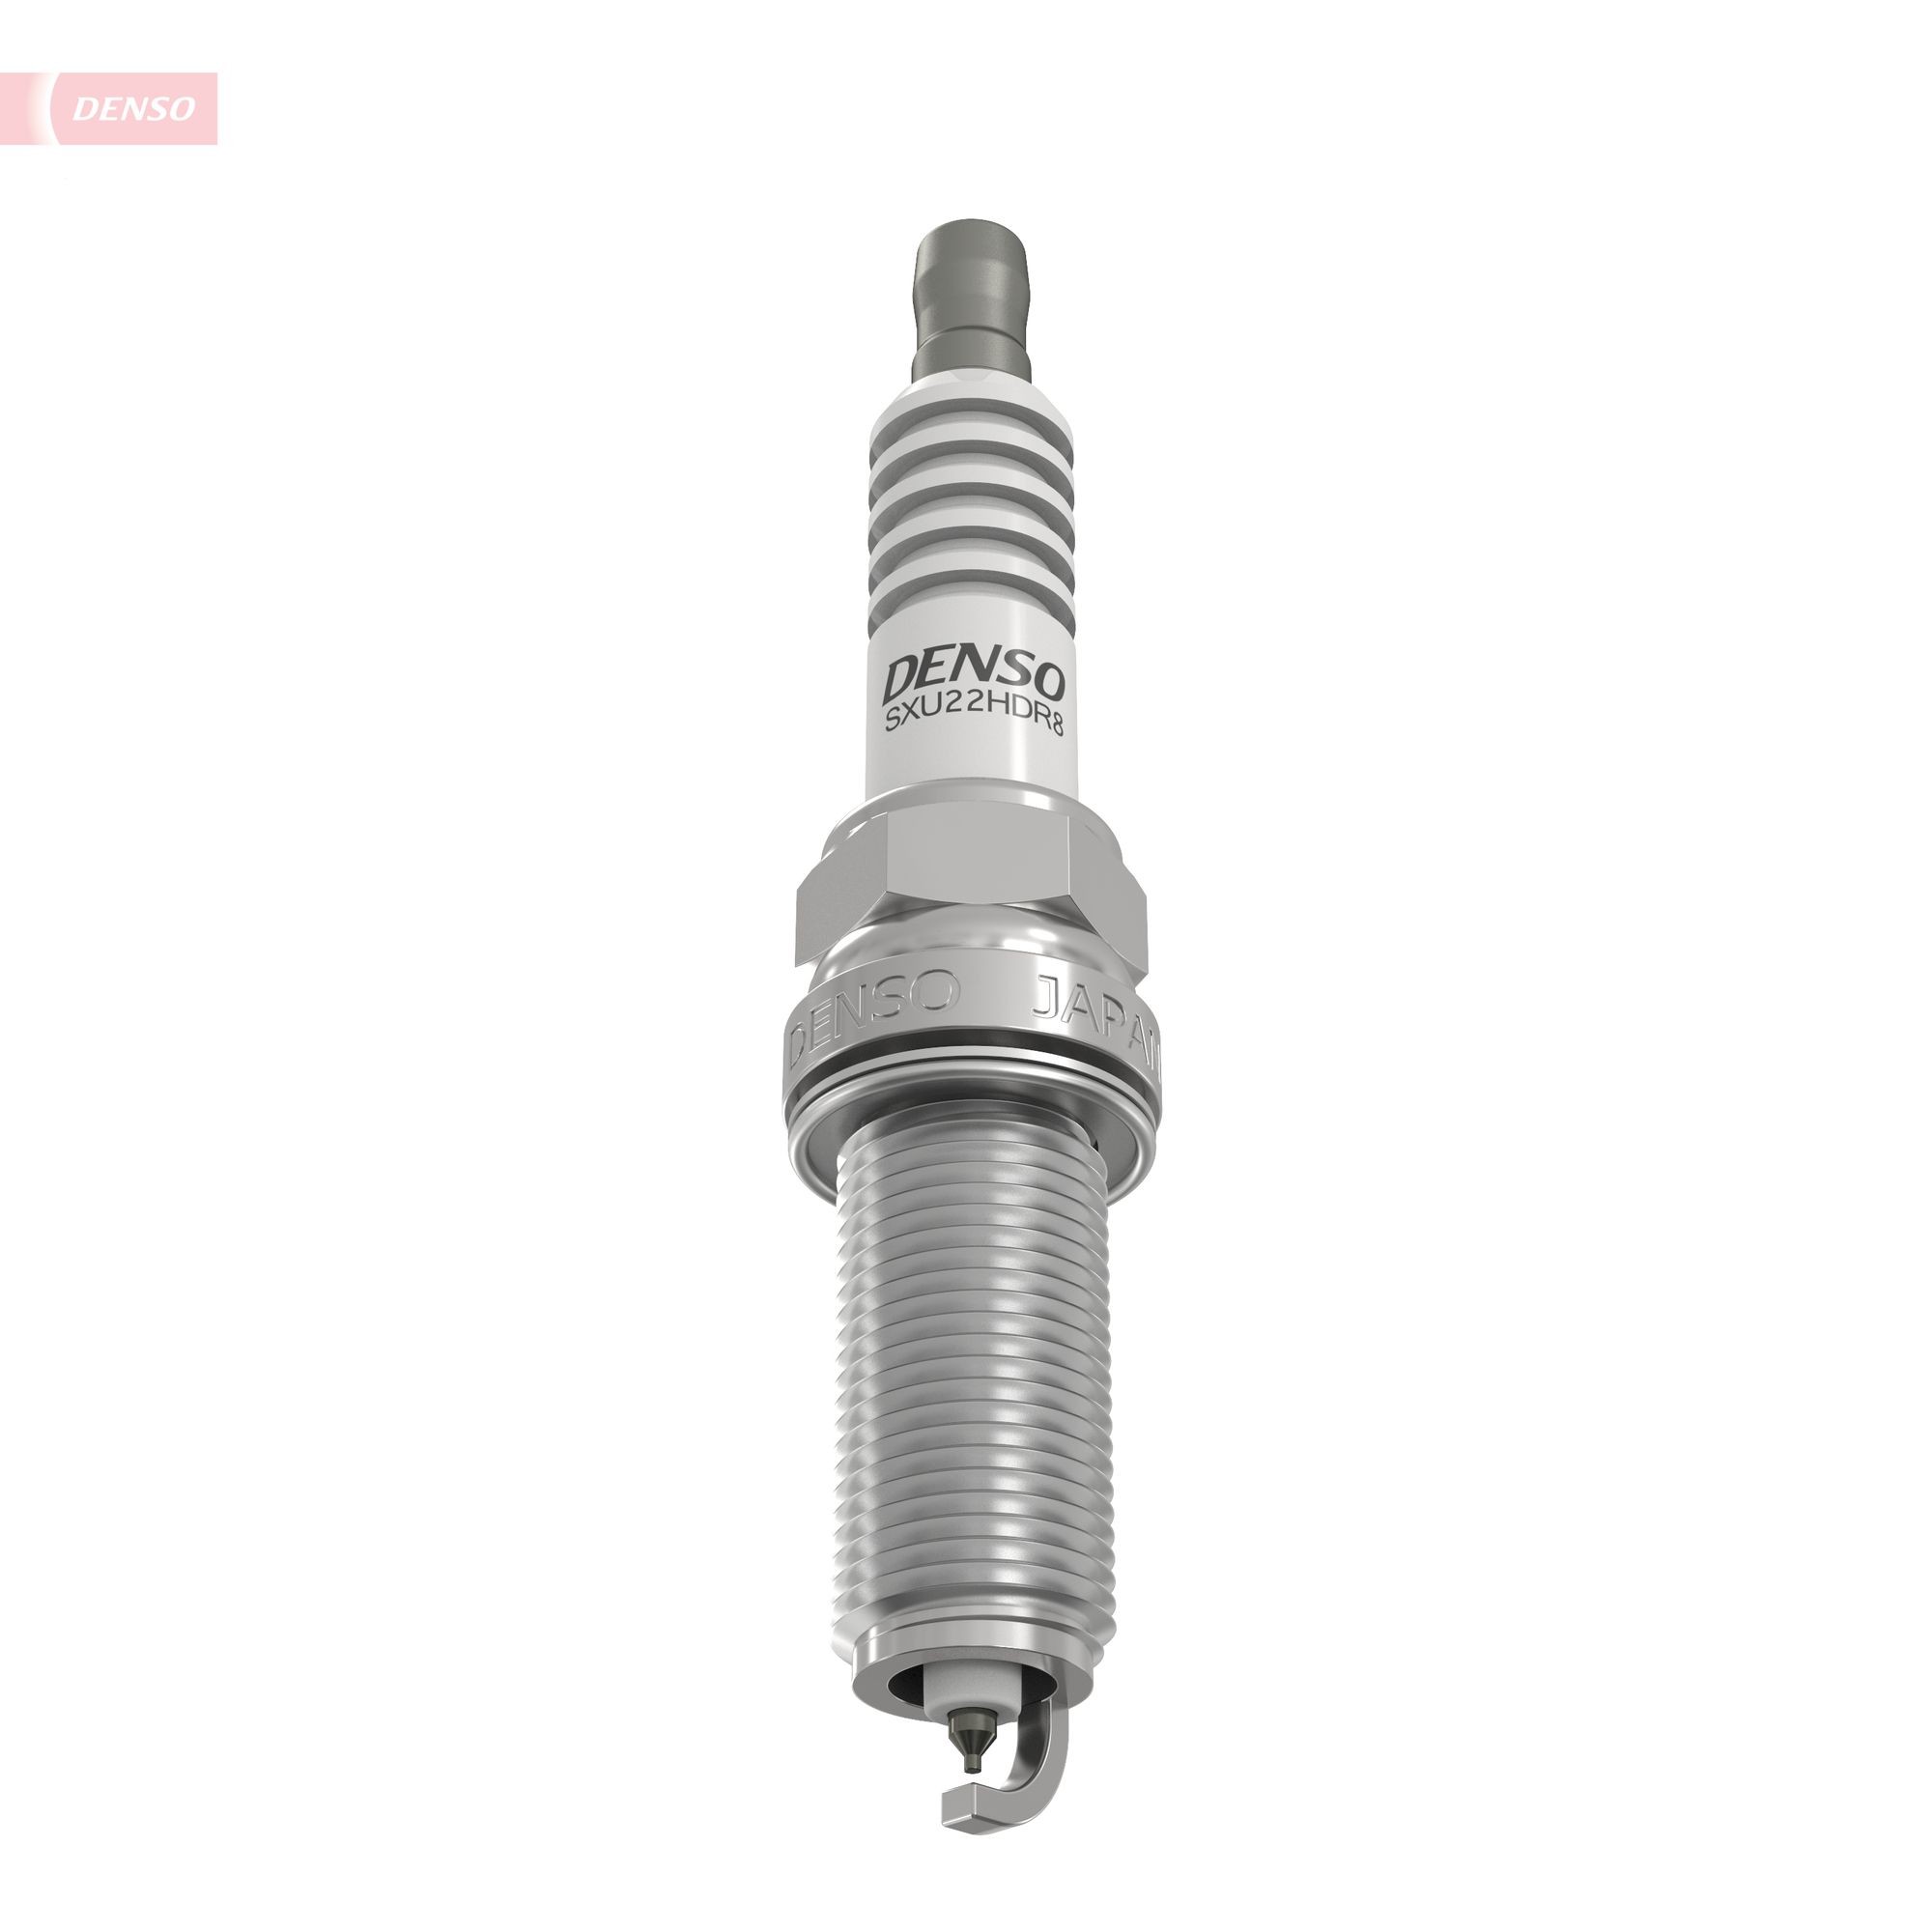 DENSO Spark plugs 3441 buy online